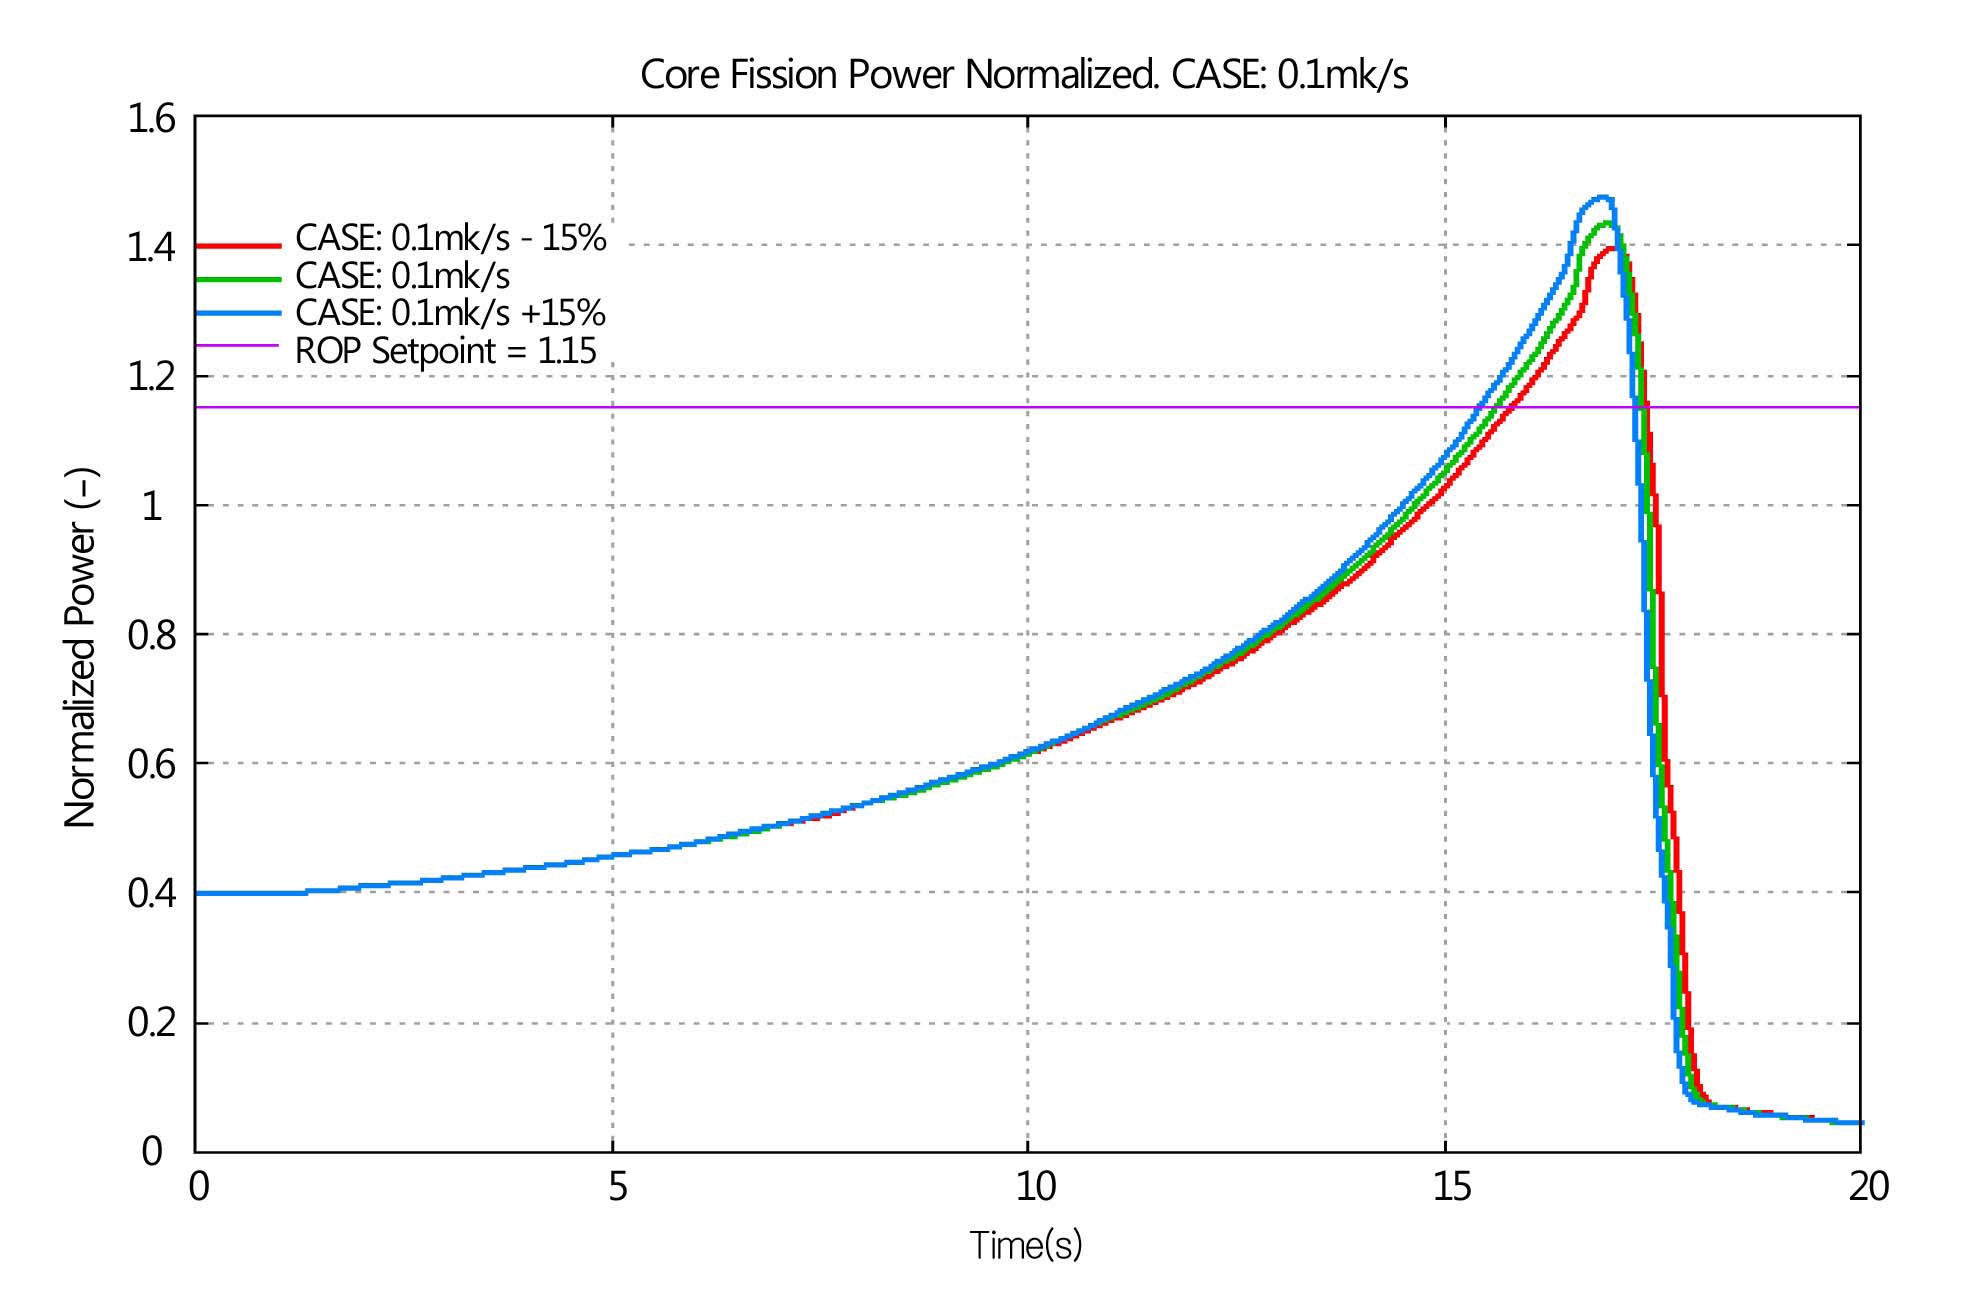 Normalized Core Fission Power (Initial Power 40%FP with an Insertion Rate of 0.1mk/s)